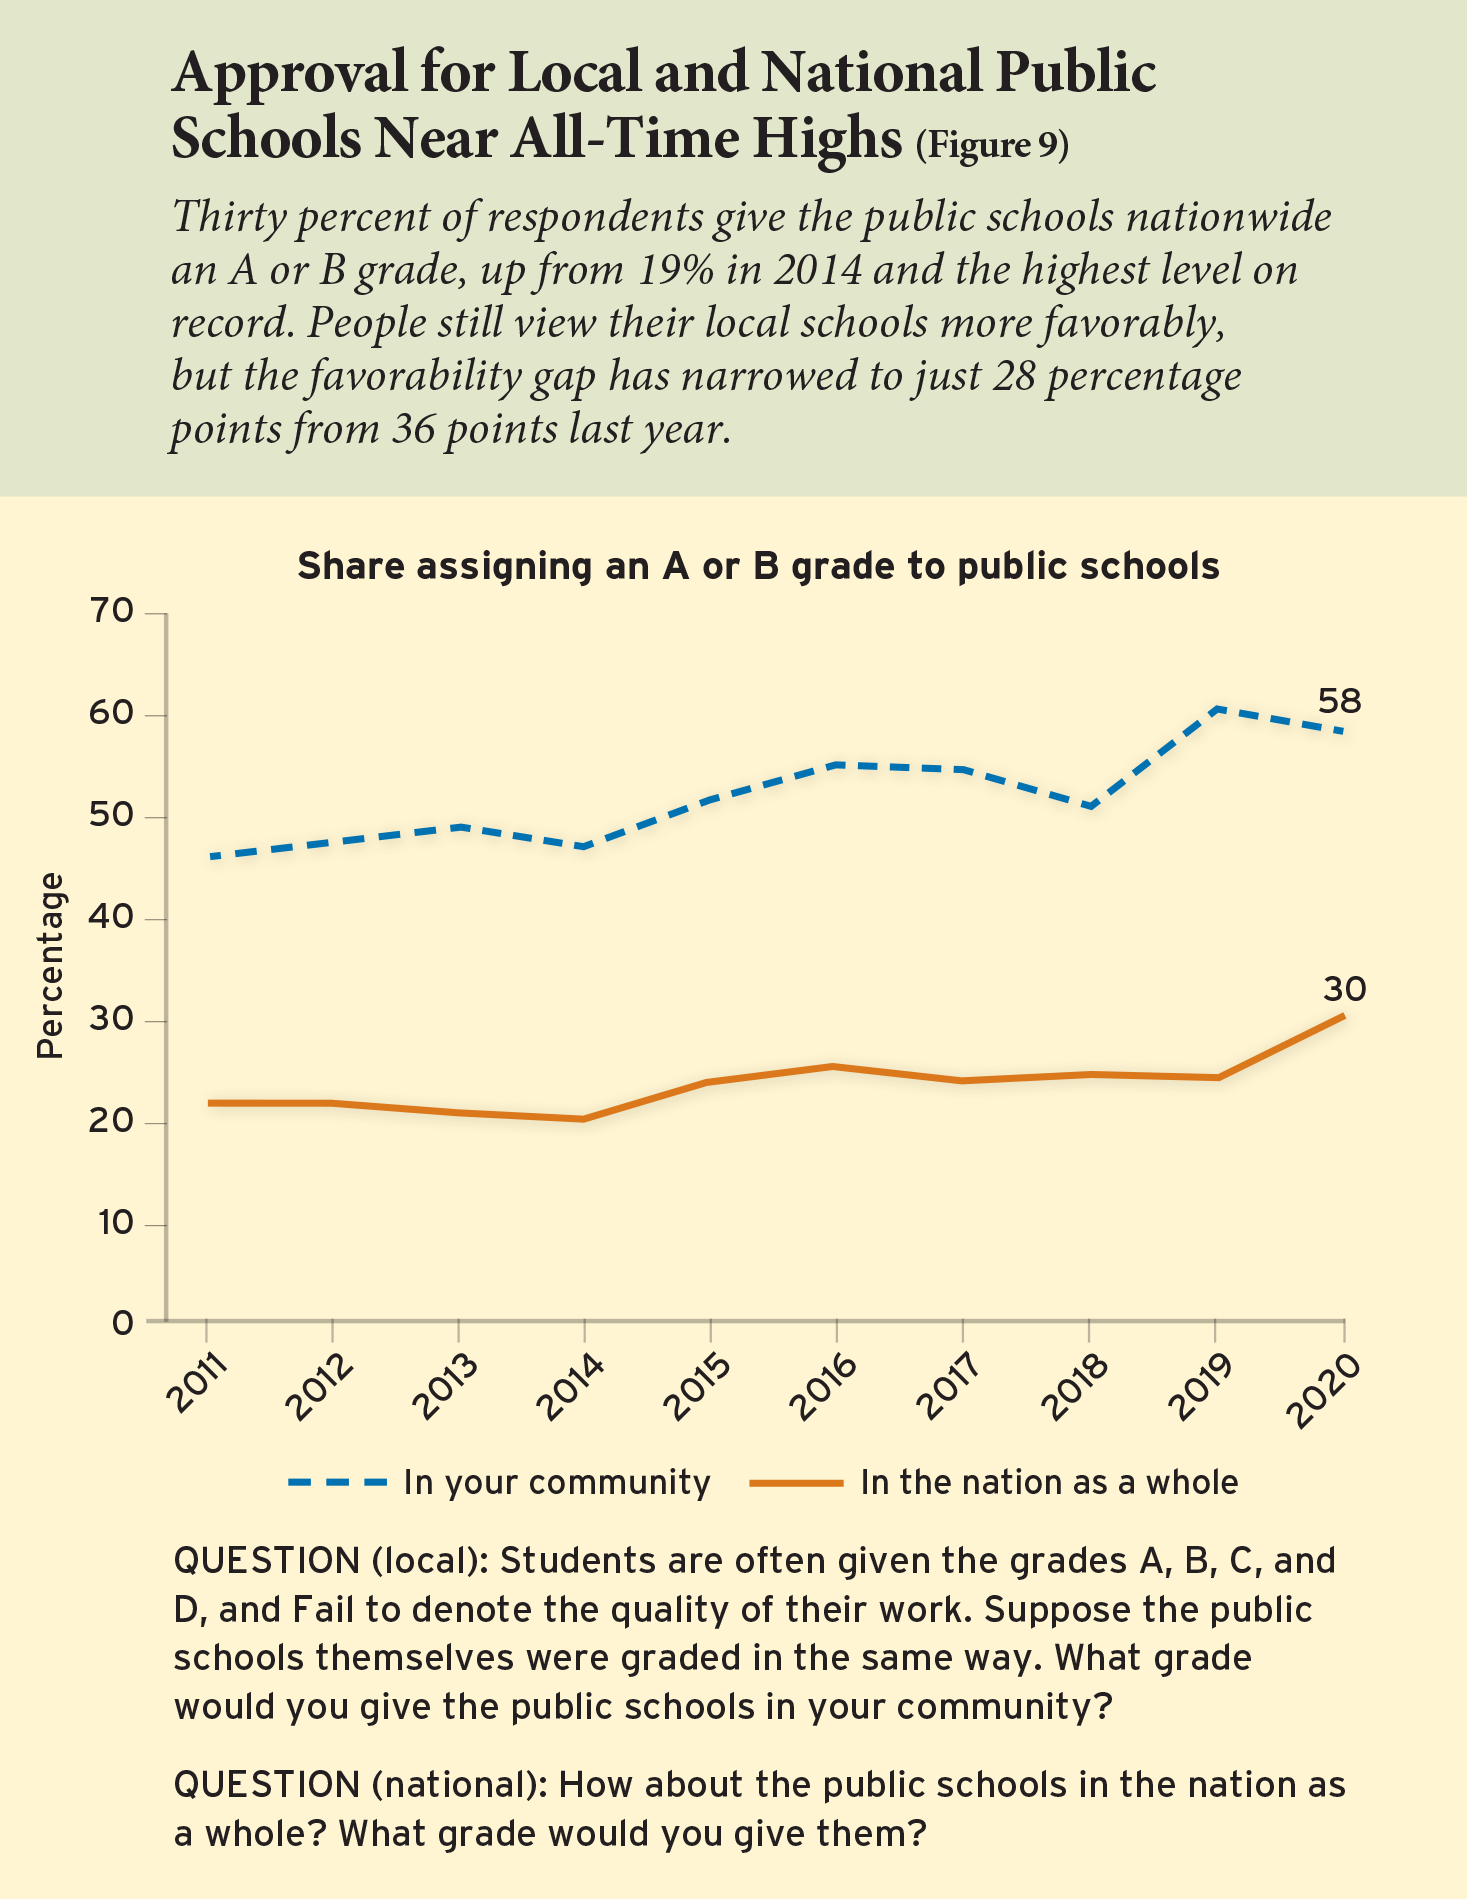 Figure 9: Approval for Local and National Public Schools Near All-Time Highs